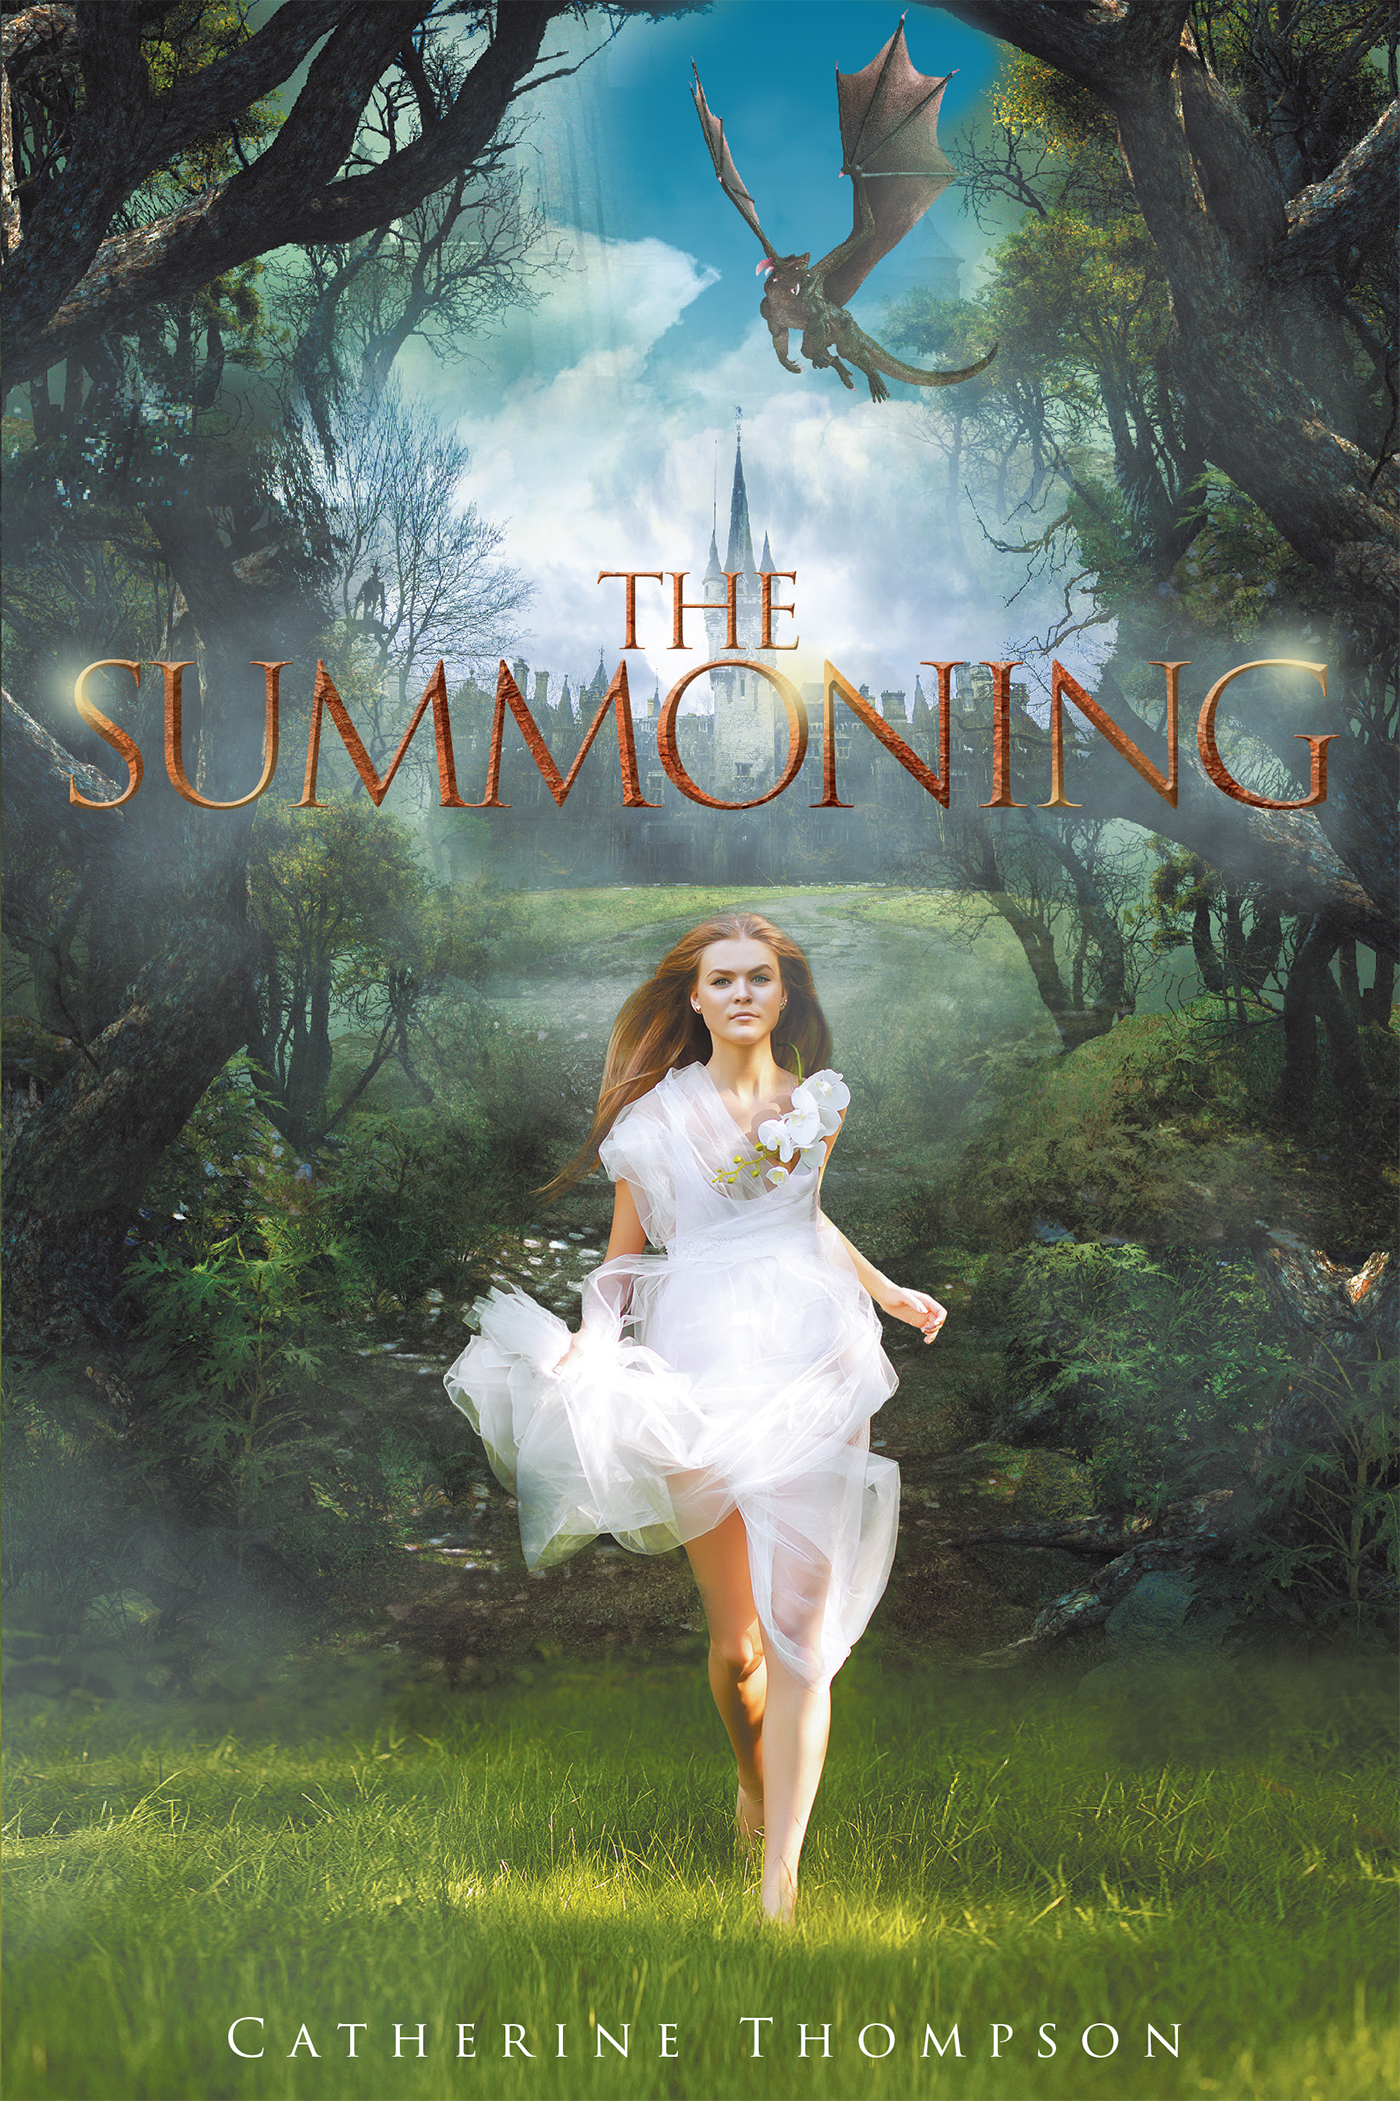 The Summoning Cover Image